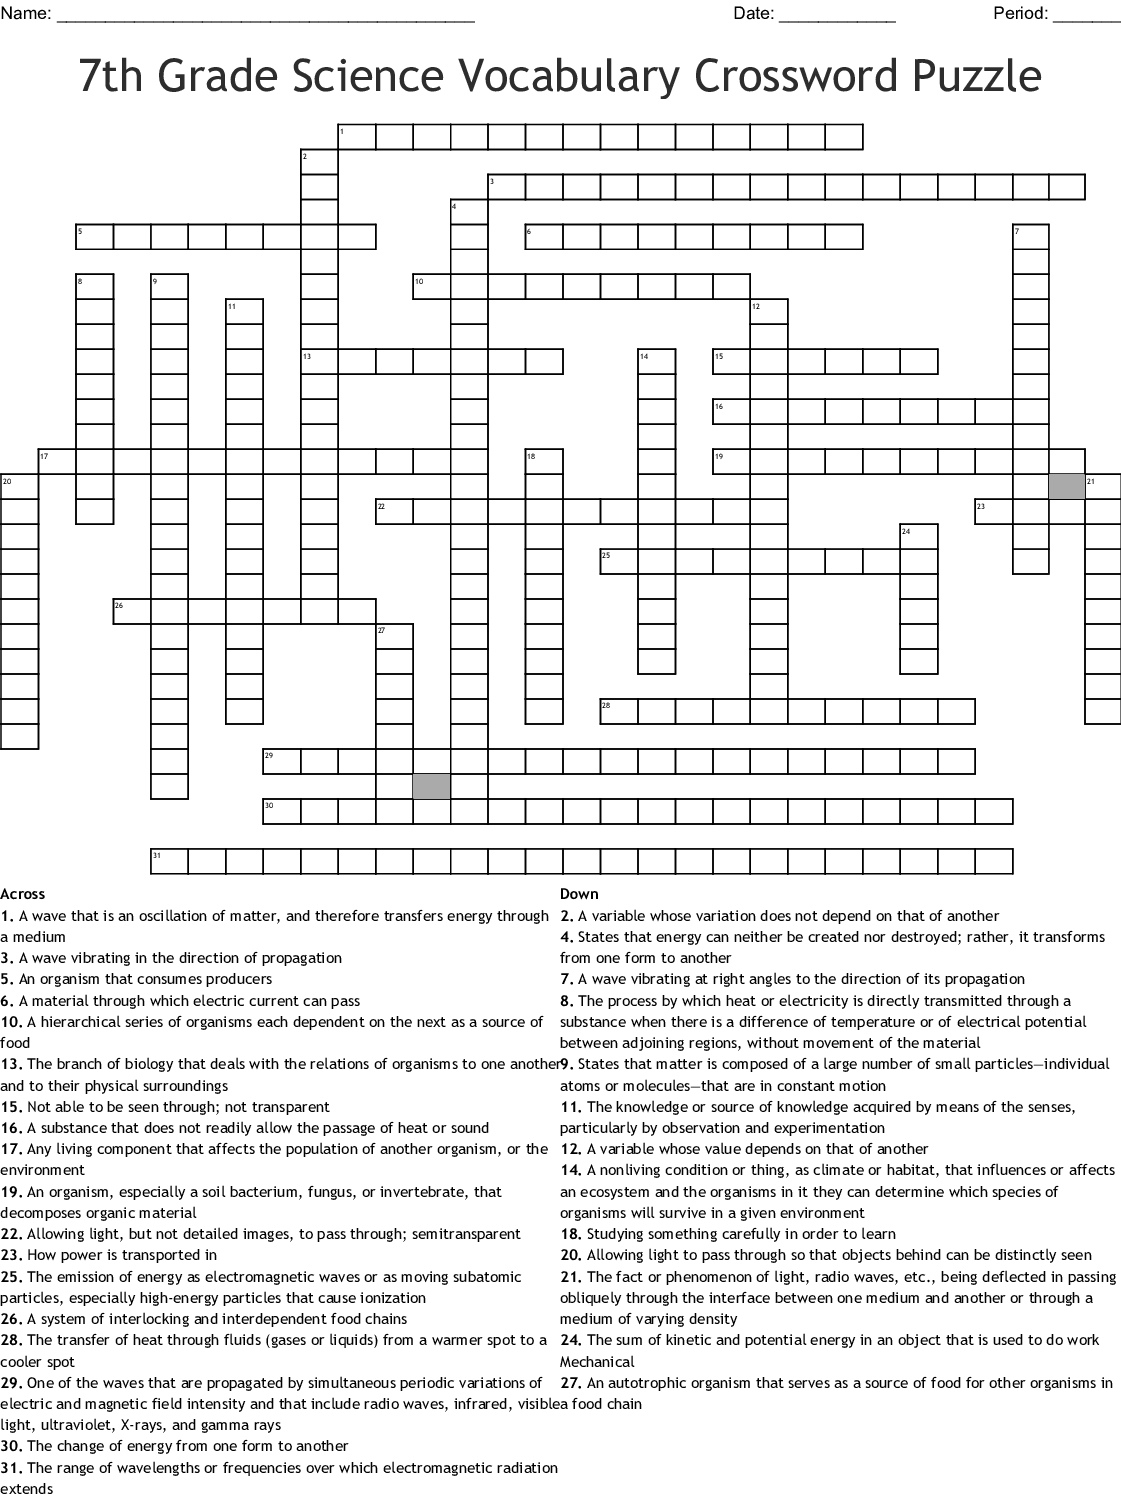 printable-crossword-puzzles-for-7th-graders-printable-crossword-puzzles